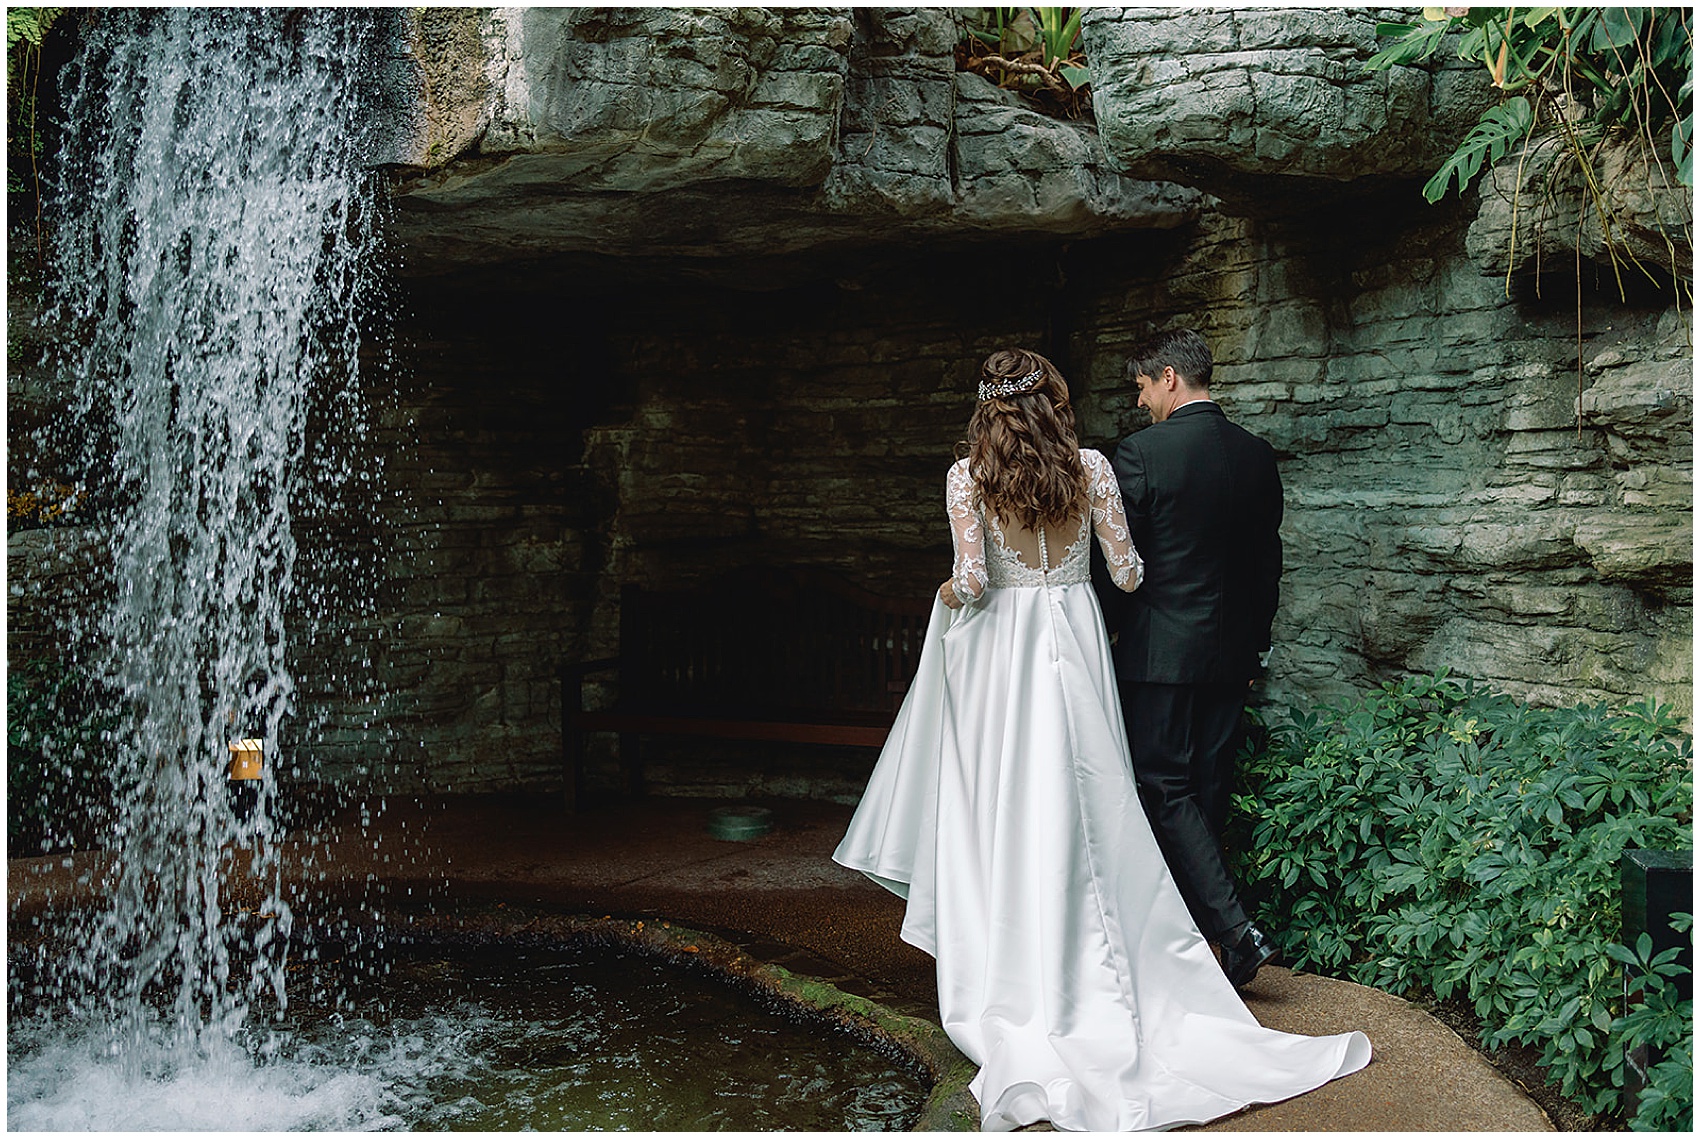 Newlyweds walk hand in hand into a cave under a waterfall at their gaylord opryland wedding